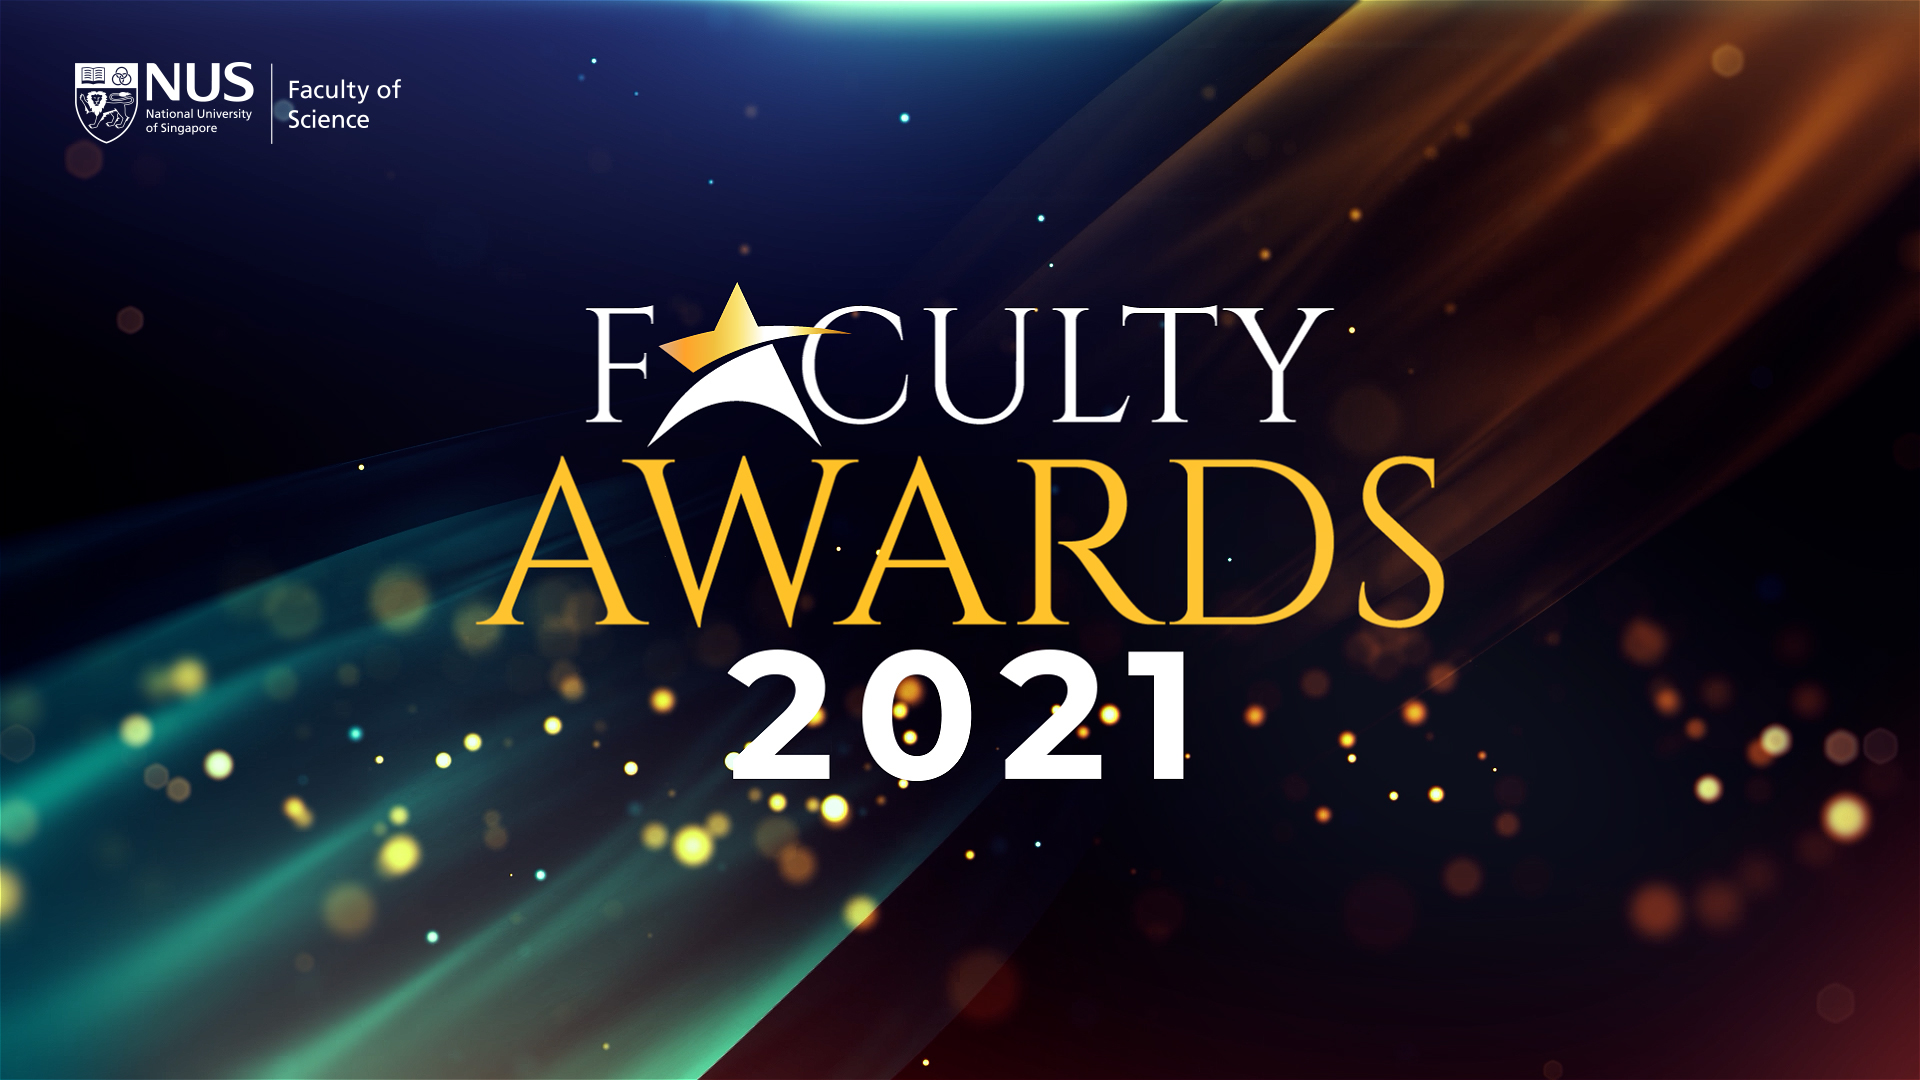 Congratulations to our staff members for winning the Faculty Awards 2021